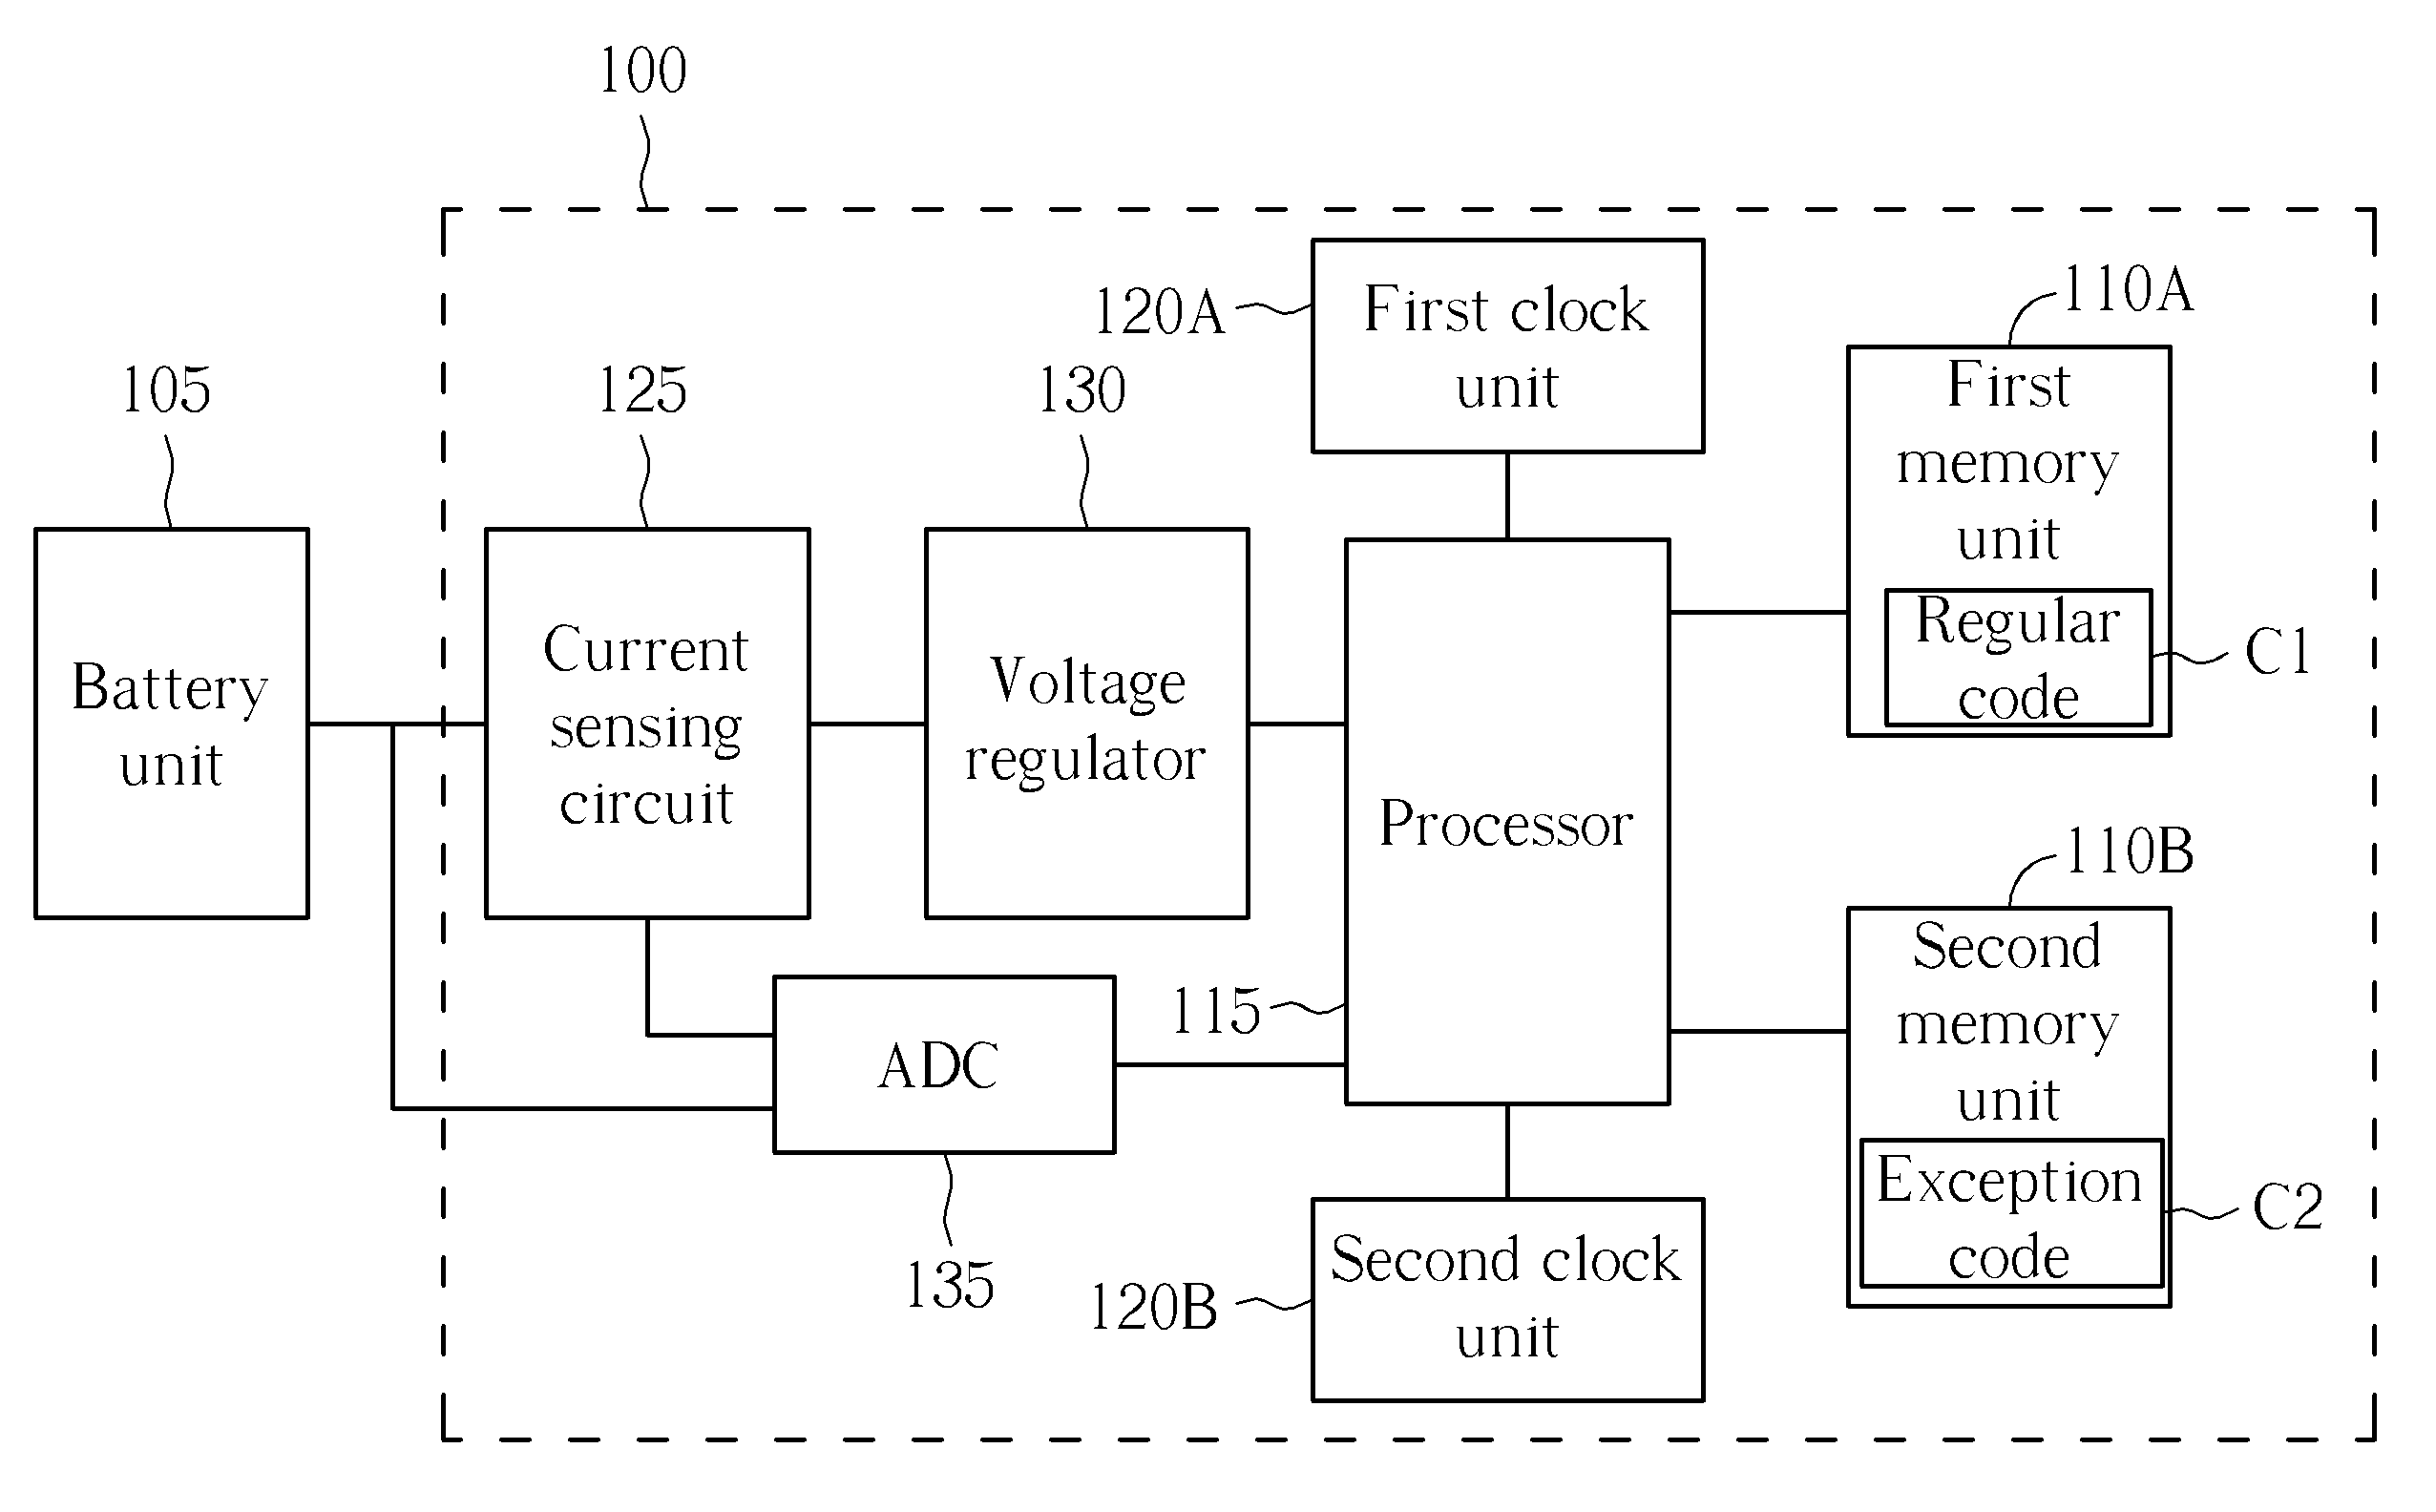 Apparatus for measuring a remaining power of a battery includes a first memory for storing a routine code and a second memory for storing an exception code